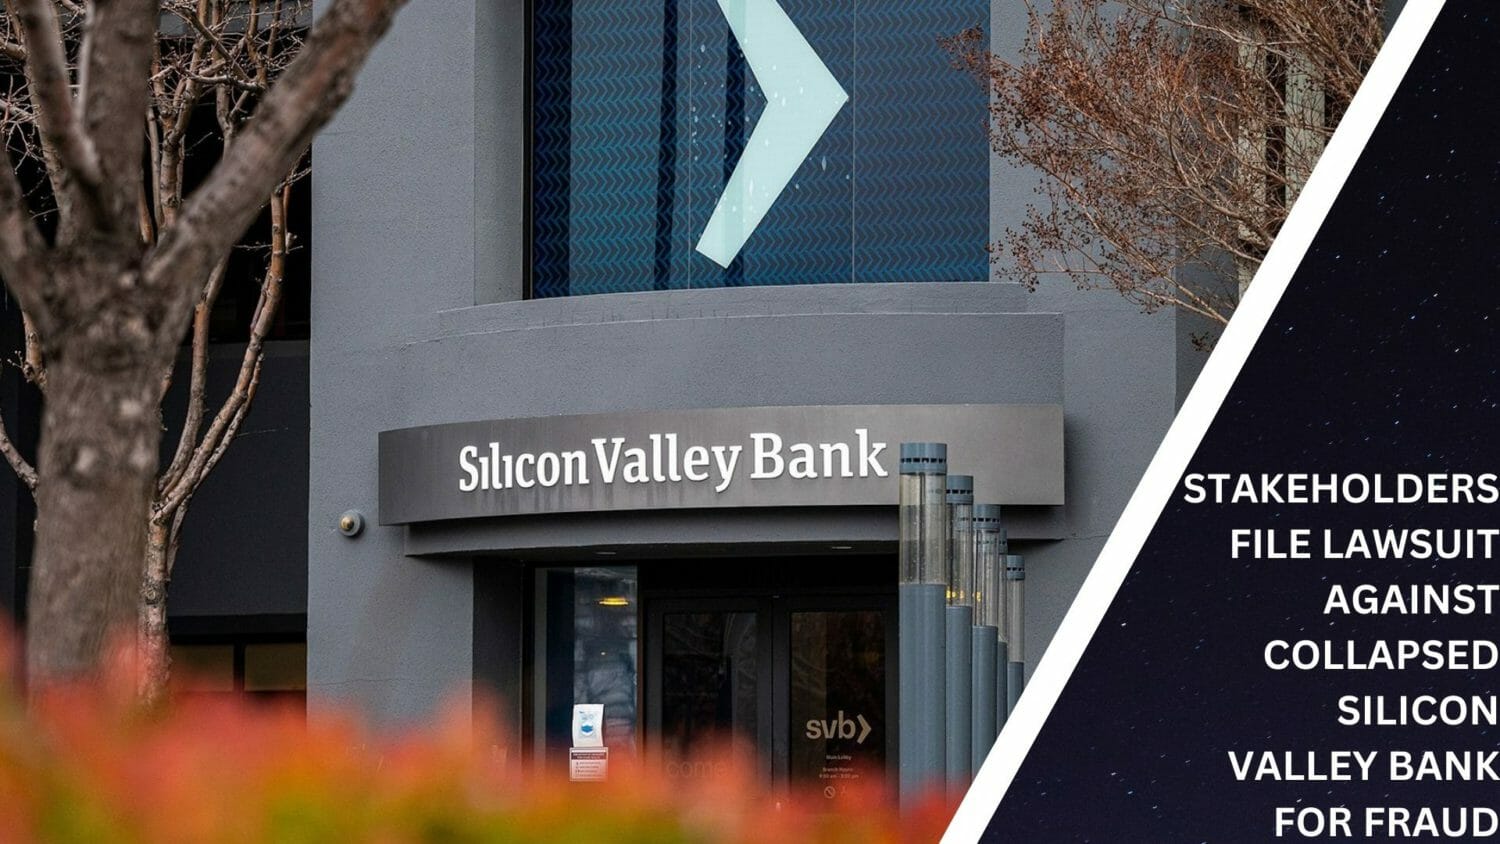 Stakeholders File Lawsuit Against Collapsed Silicon Valley Bank For Fraud